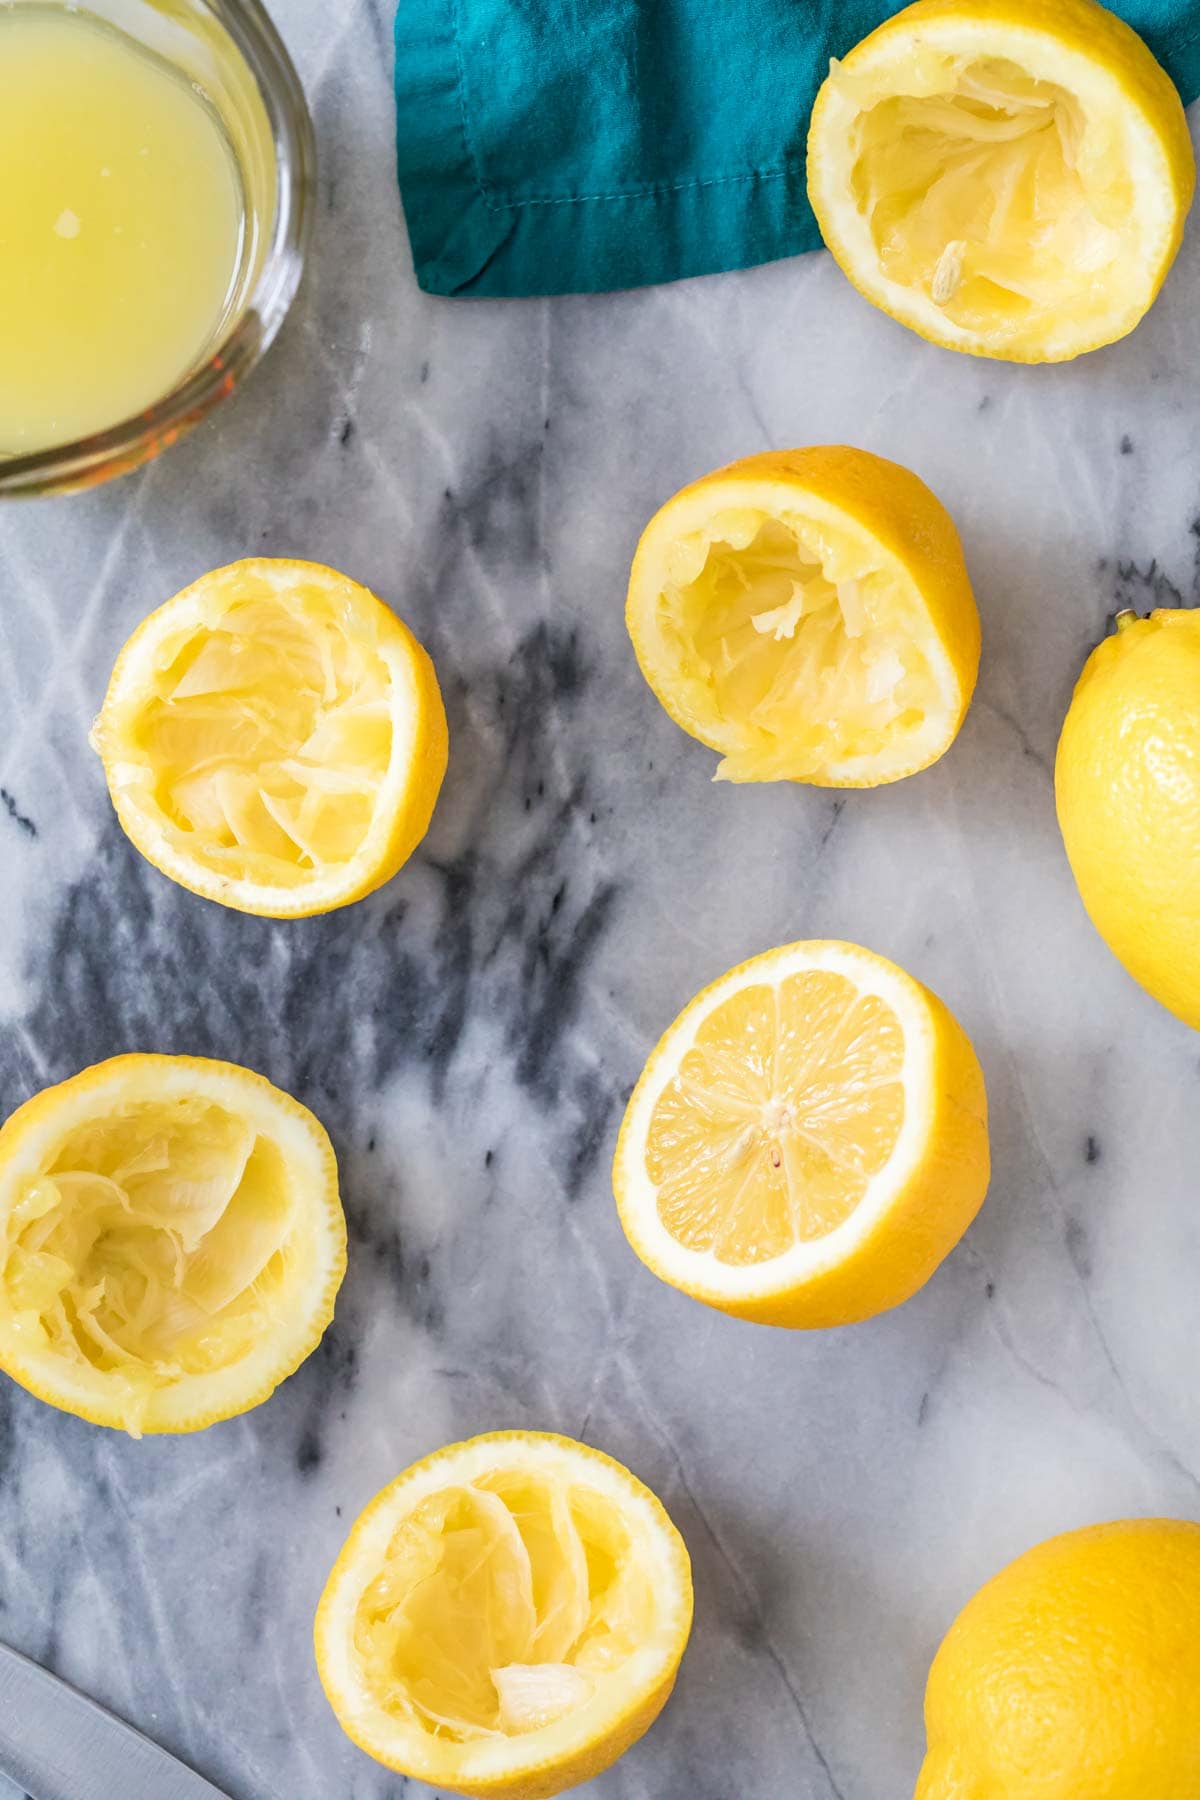 juiced lemon halves scattered on a gray marble surface